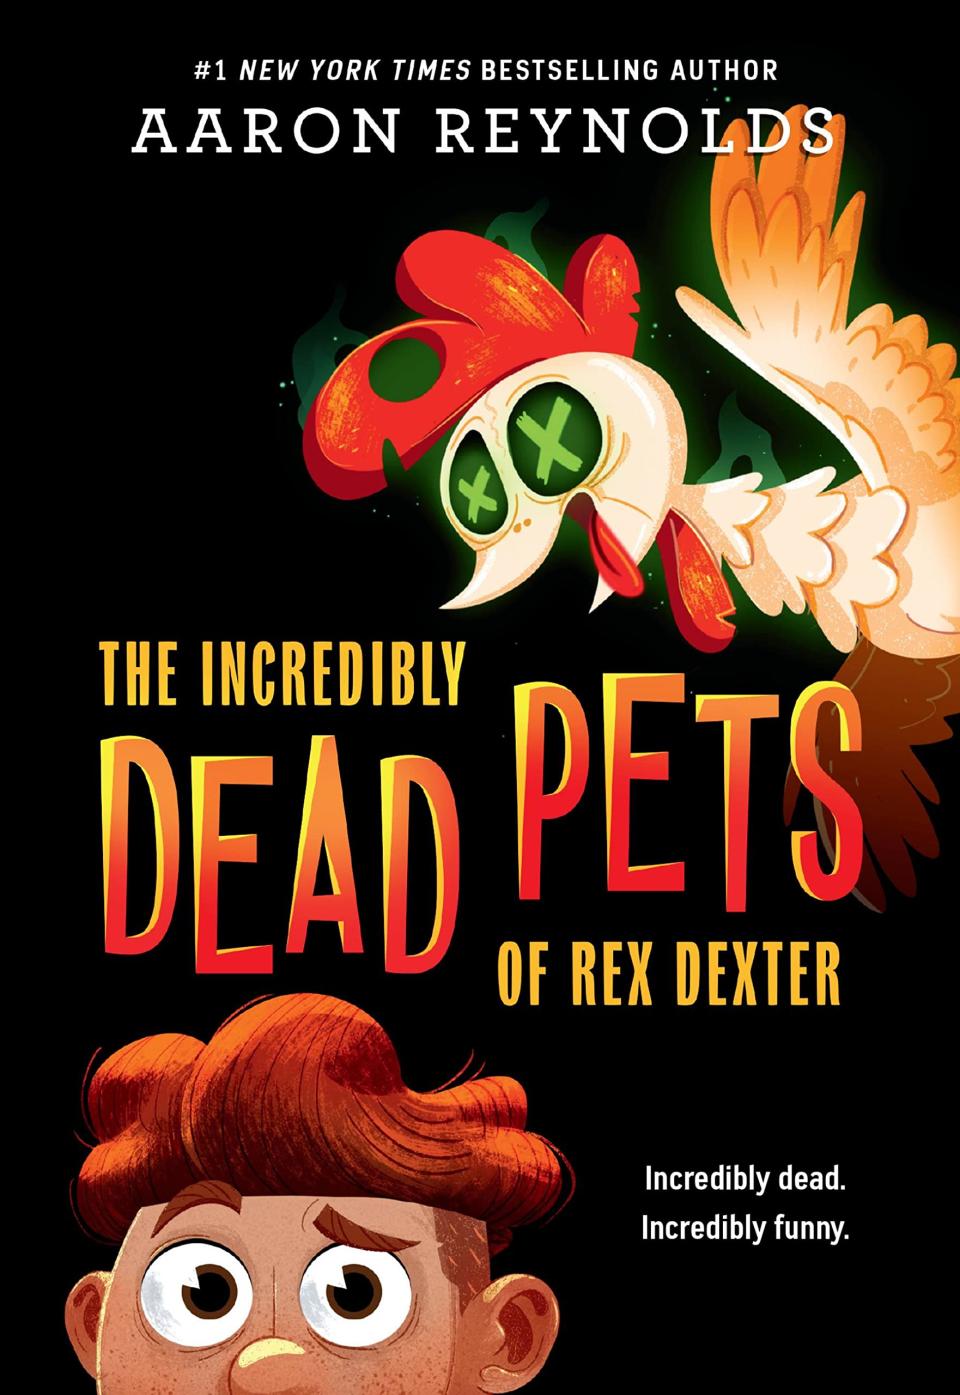 "The Incredibly Dead Pets of Rex Dexter"